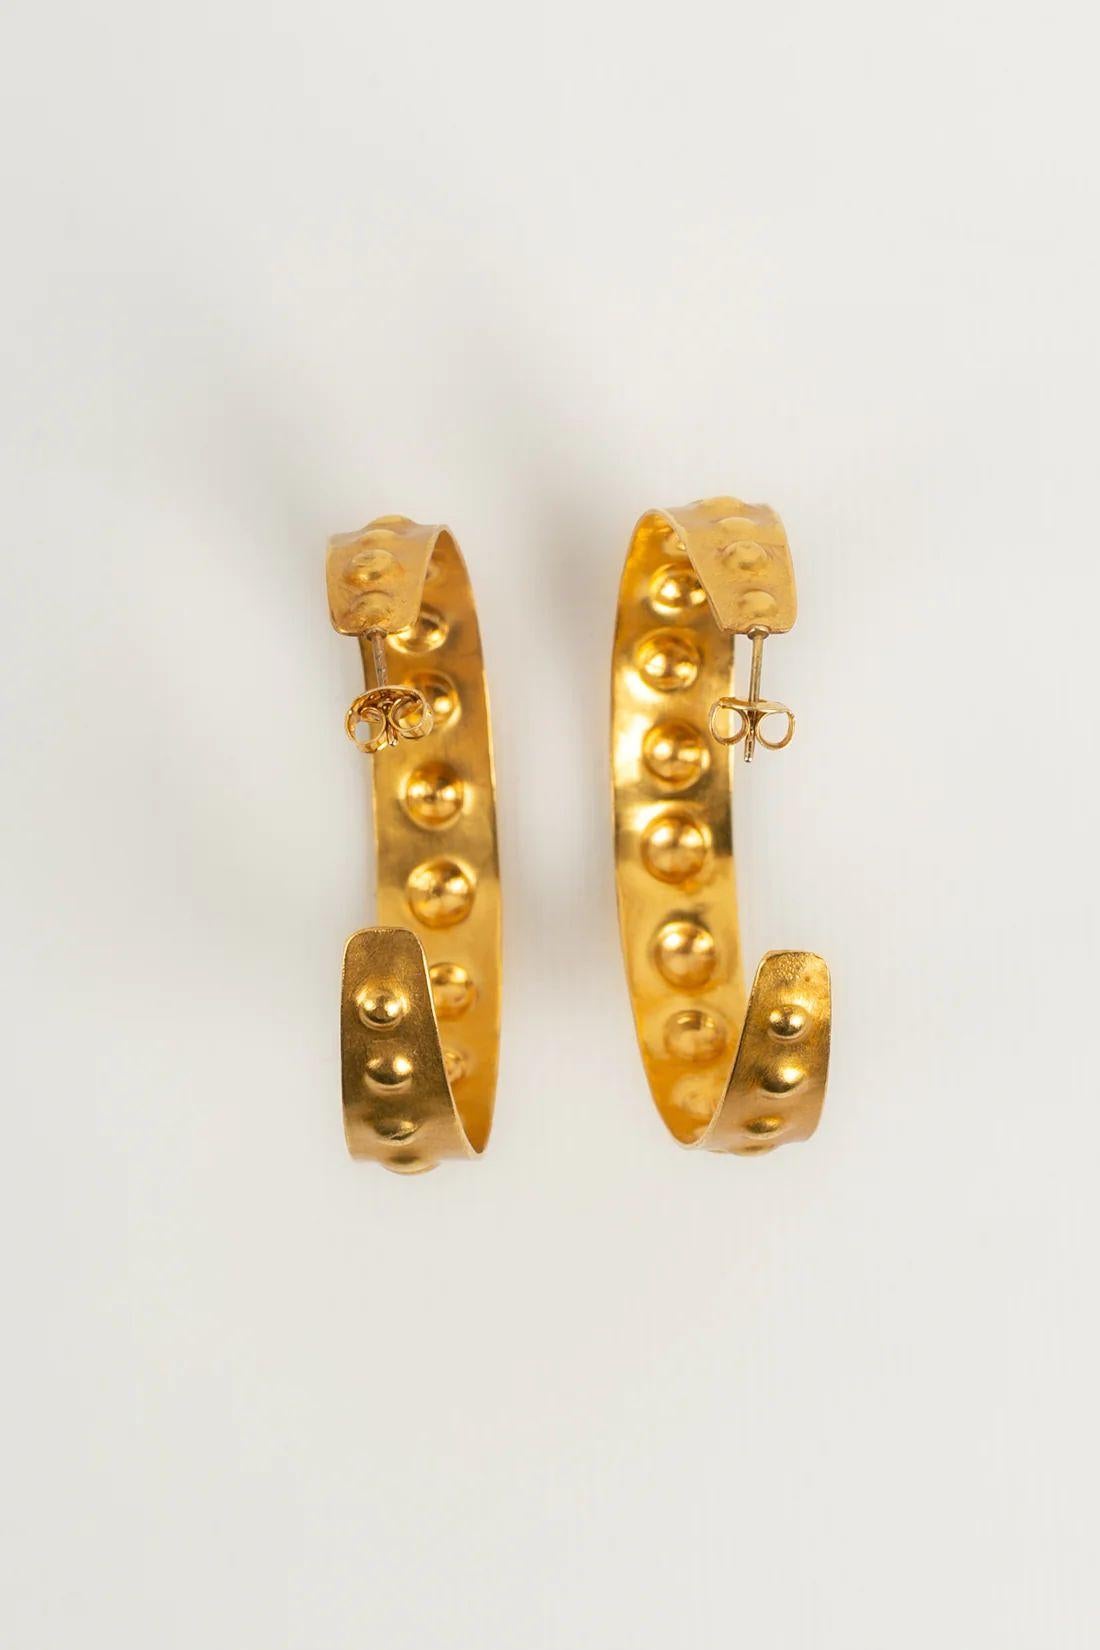 Van der Straeten - Gold metal creole earrings.

Additional information:
Dimensions: Ø 5 cm

Condition: 
Very good condition

Seller Ref number: `BO207